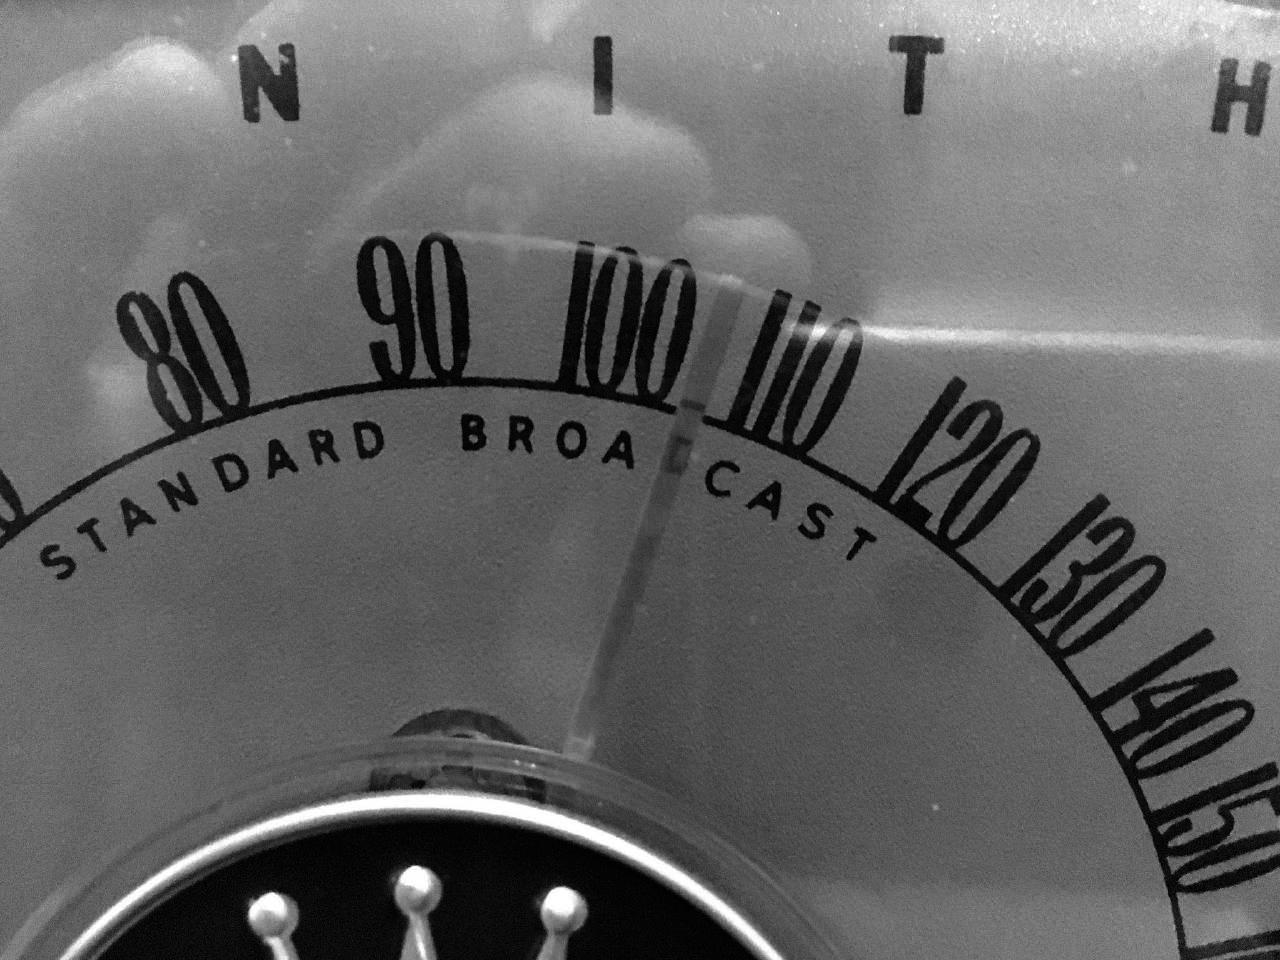 Image depicts a vintage Zenith radio dial with a needle pointing between 100 and 110 on the dial.